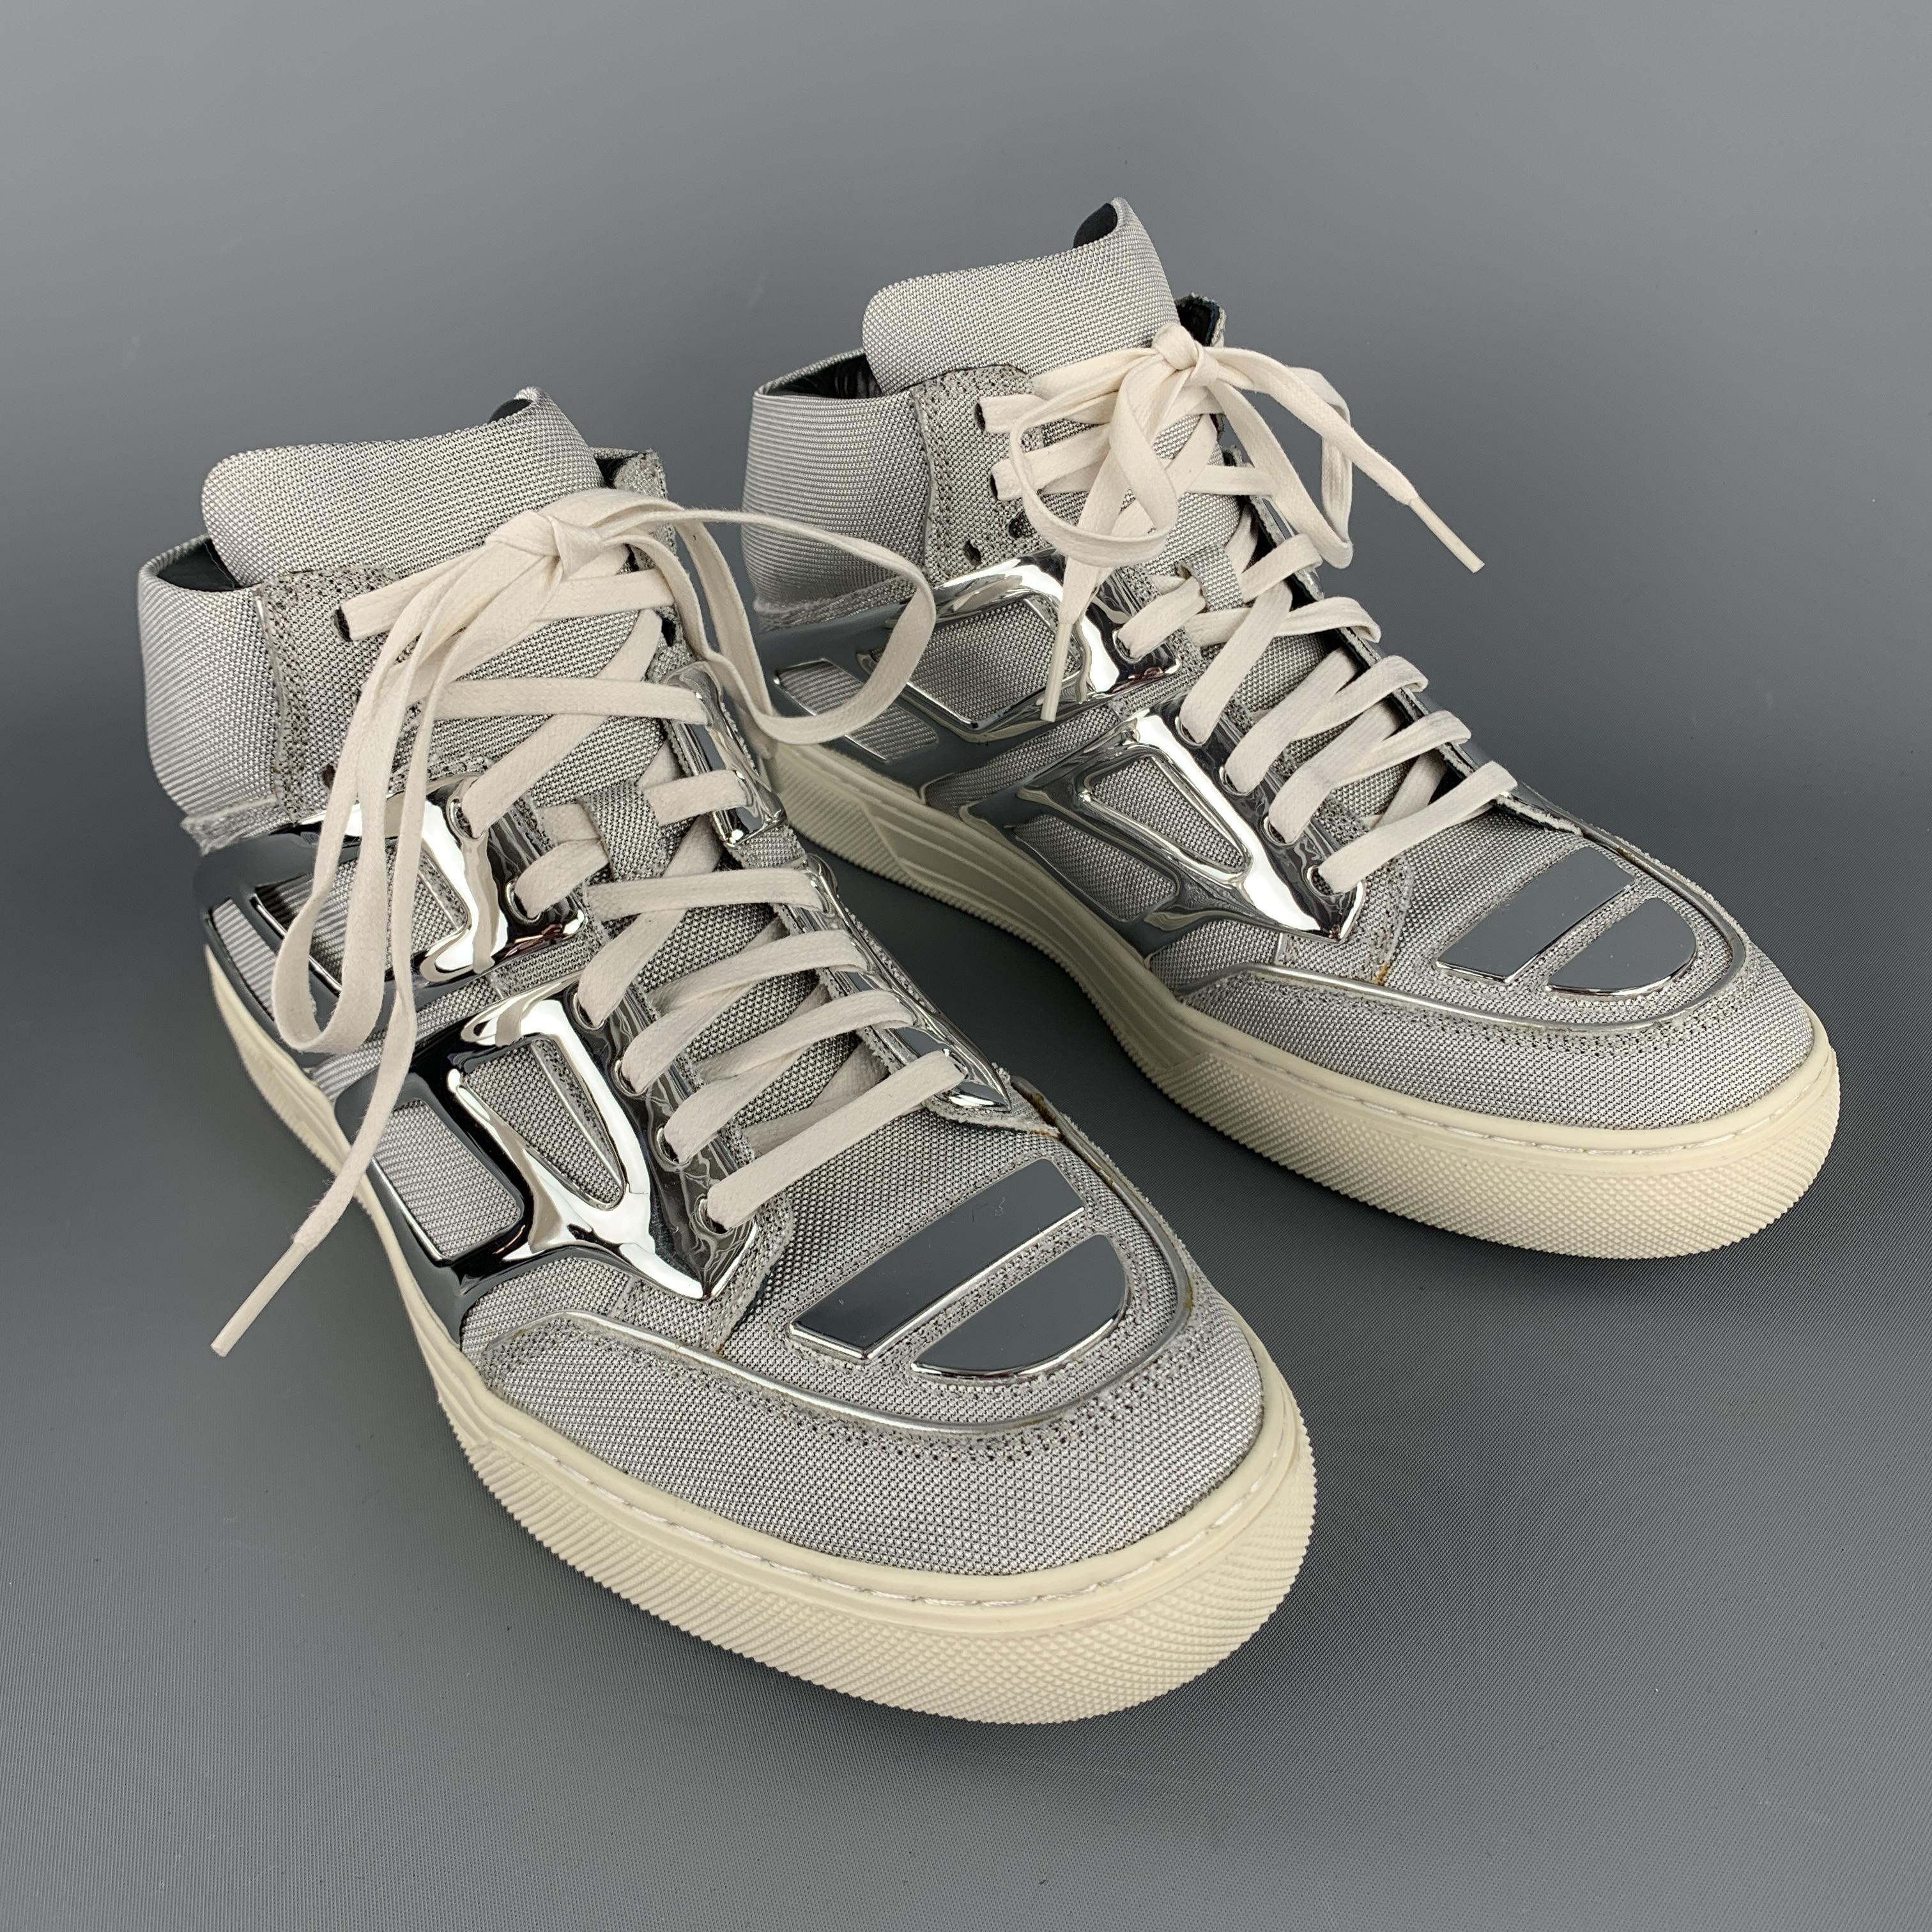 ALEJANDRO INGELMO Tron metallic high top sneakers comes in silver tones, metallic canvas and plastic material, with a white lace and rubber sole. 

New with Box.
Marked: 8M
Original Retail Price: $550.00

Outsole: 11 x 4 in.